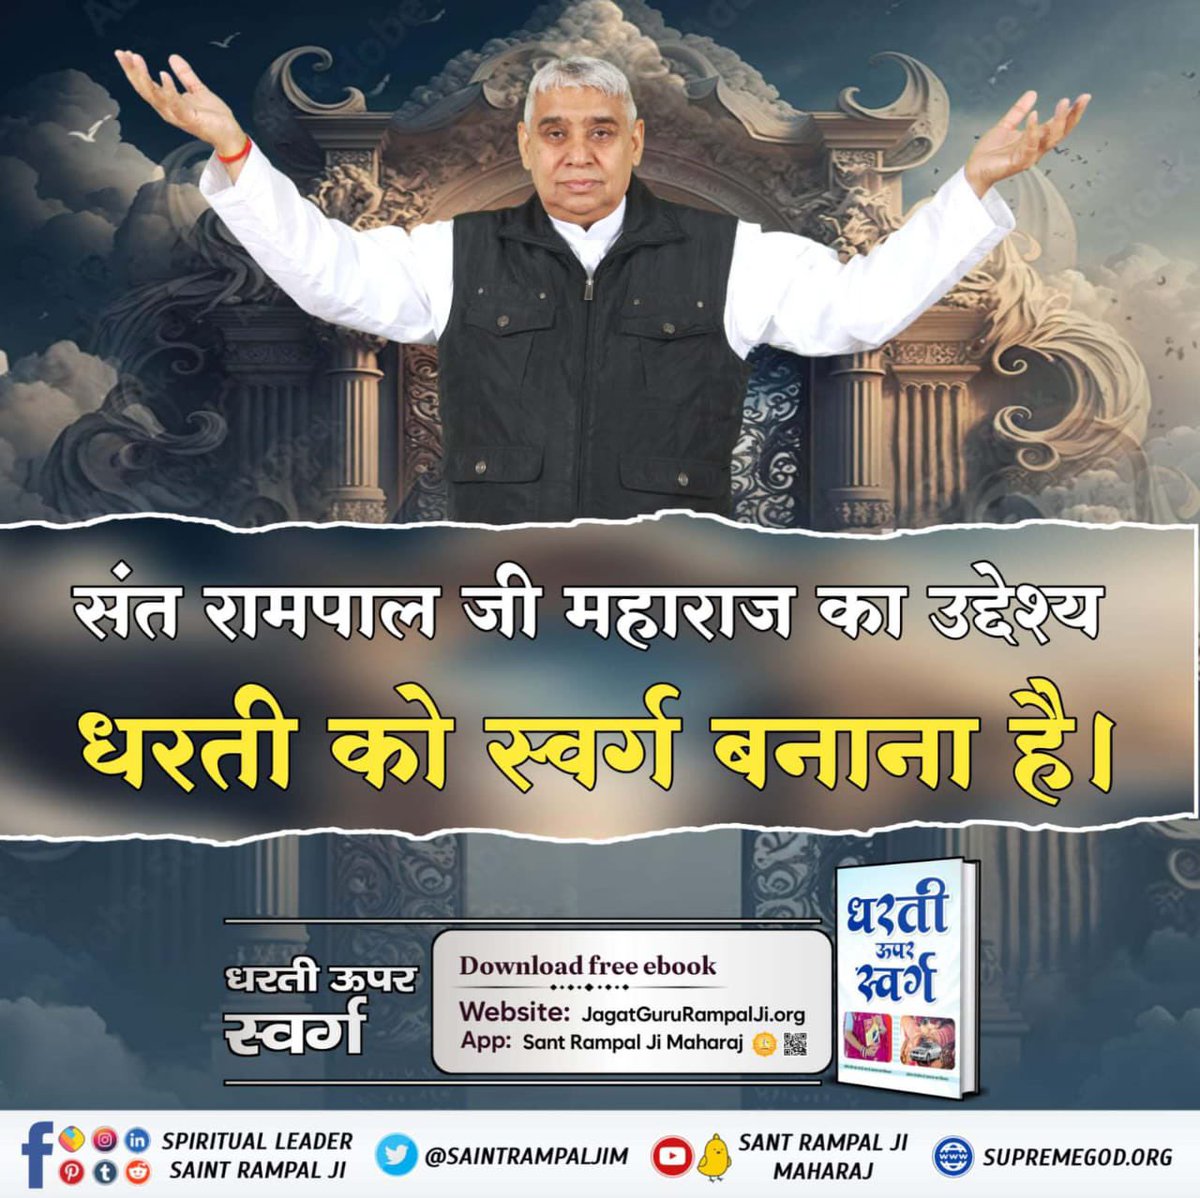 #धरती_को_स्वर्ग_बनाना_है
After hearing the thoughts of Sant Rampal Ji Maharaj, no one can ever consider either giving or taking dowry, the logic is so hard-hitting.
Sant Rampal Ji Maharaj
Visit Official site 'SUPREMEGOD. ORG'